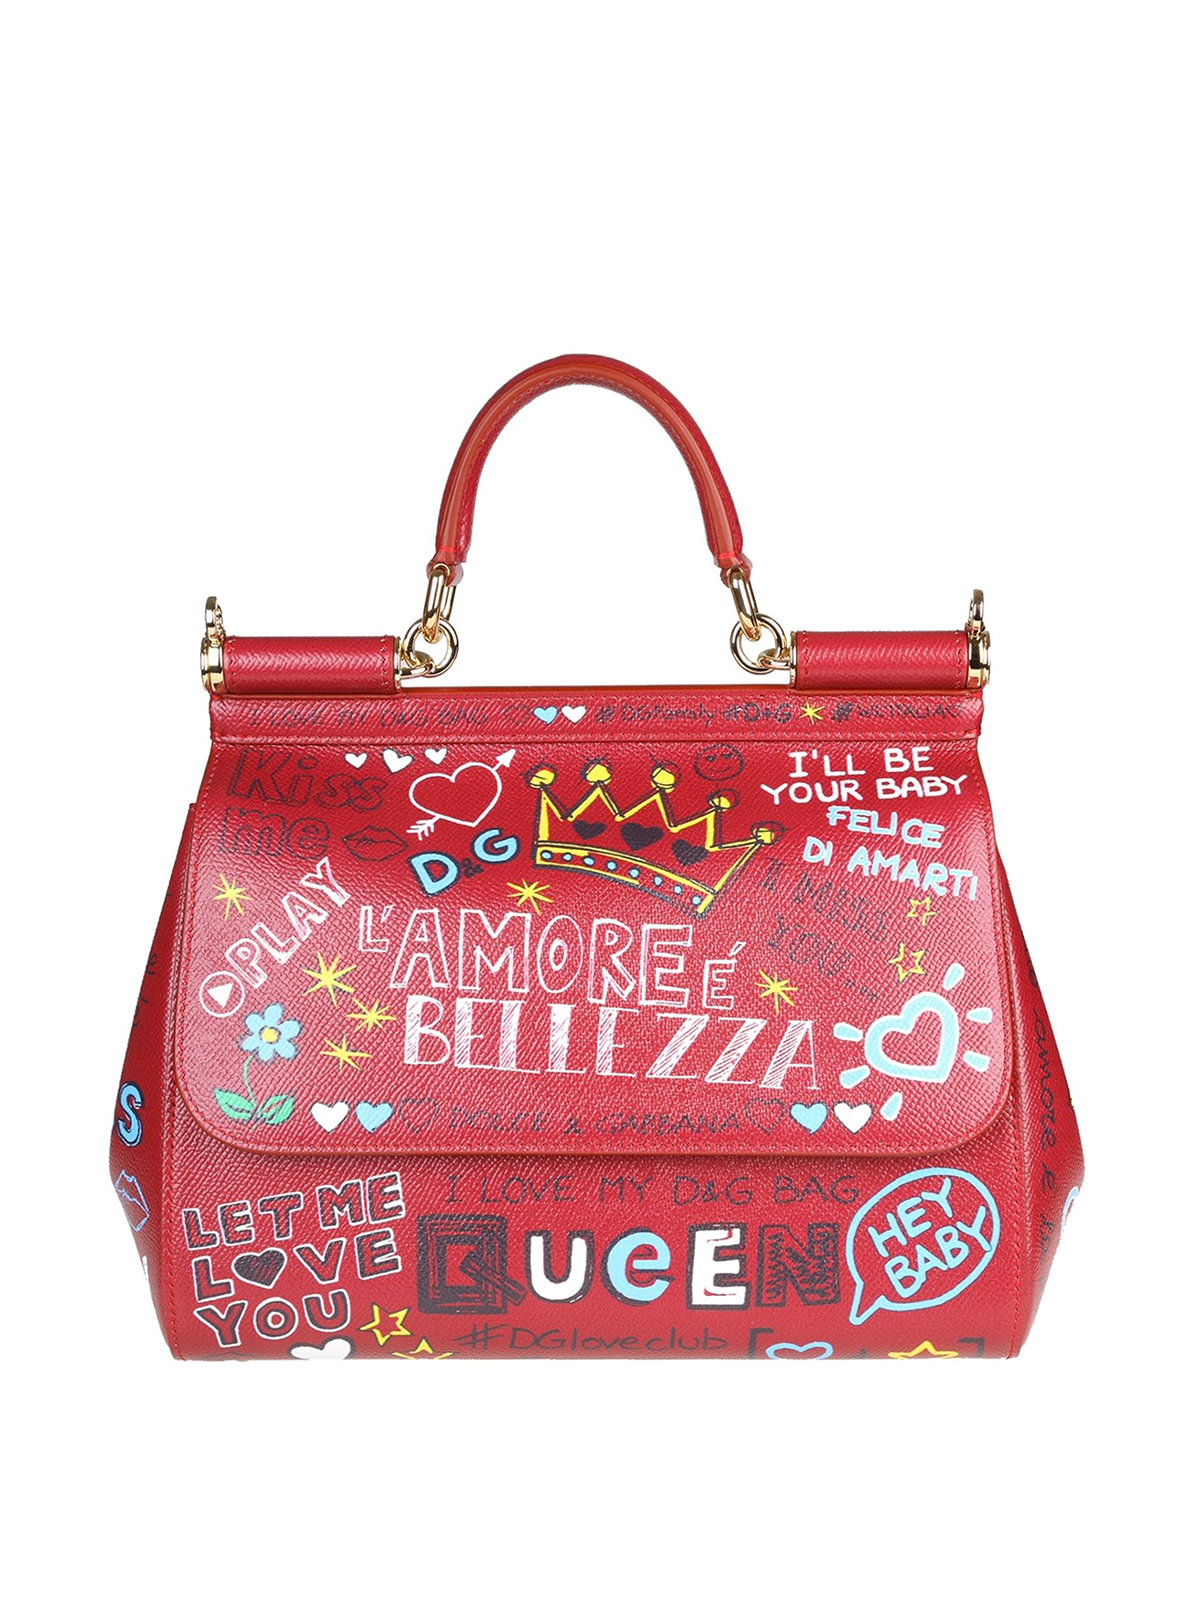 dolce and gabbana red bag